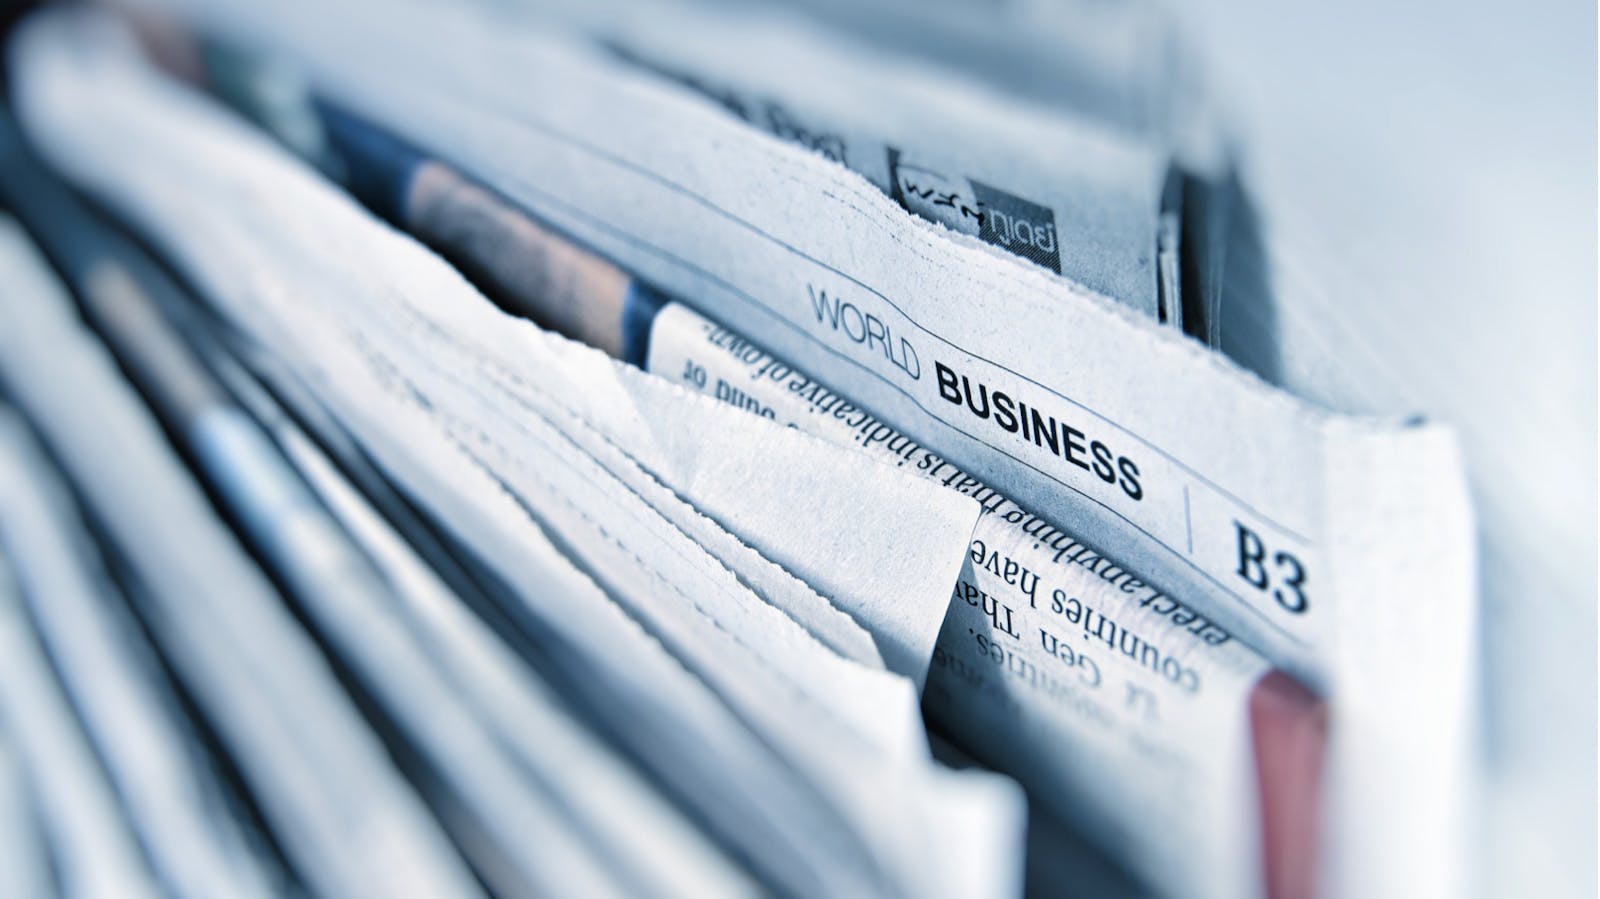 Collection of newspapers with the world business section visible